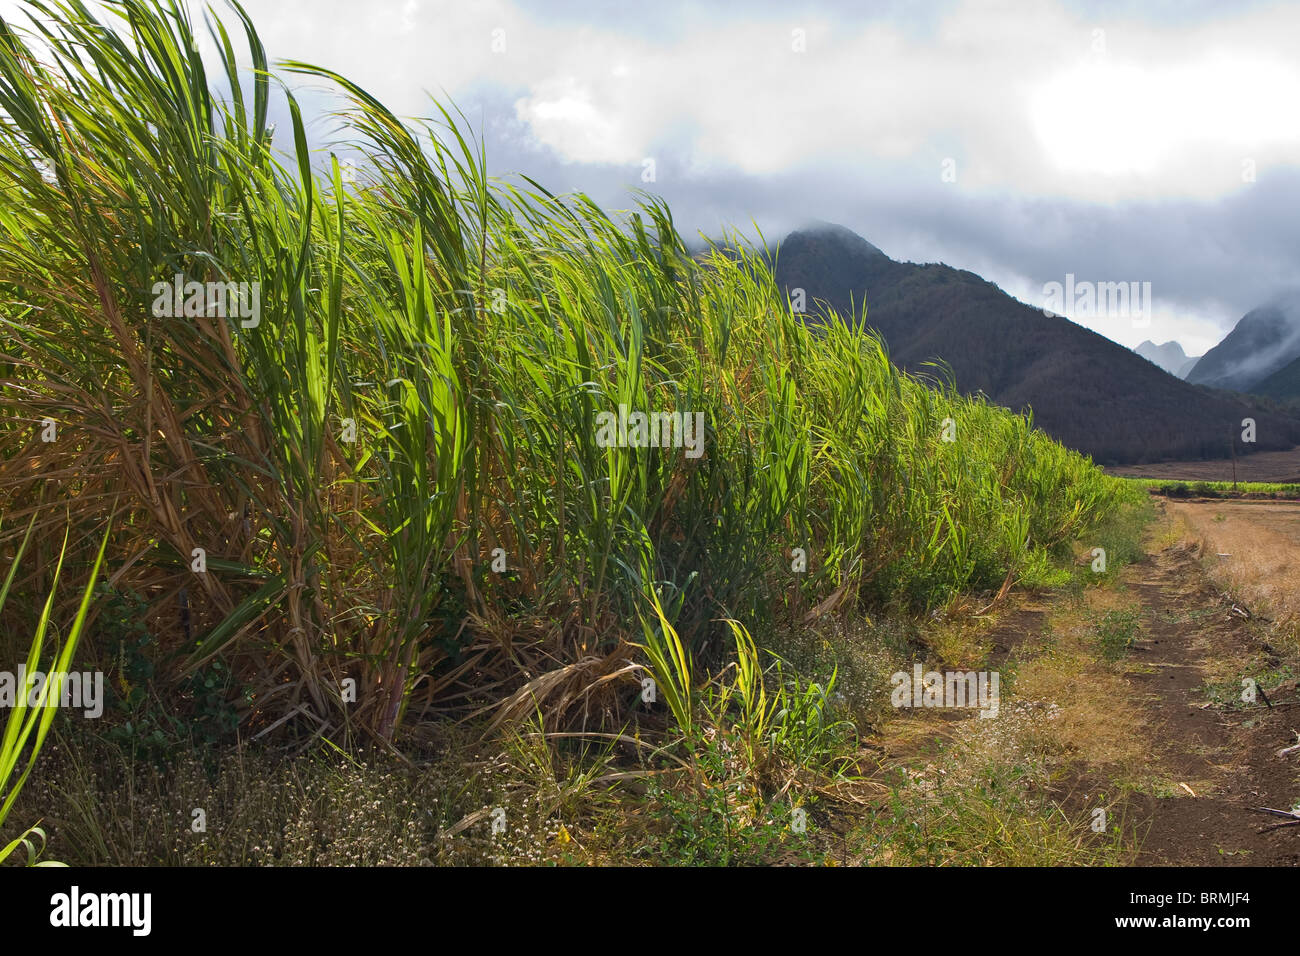 Large sugar cane plantation with cloudy sky Stock Photo